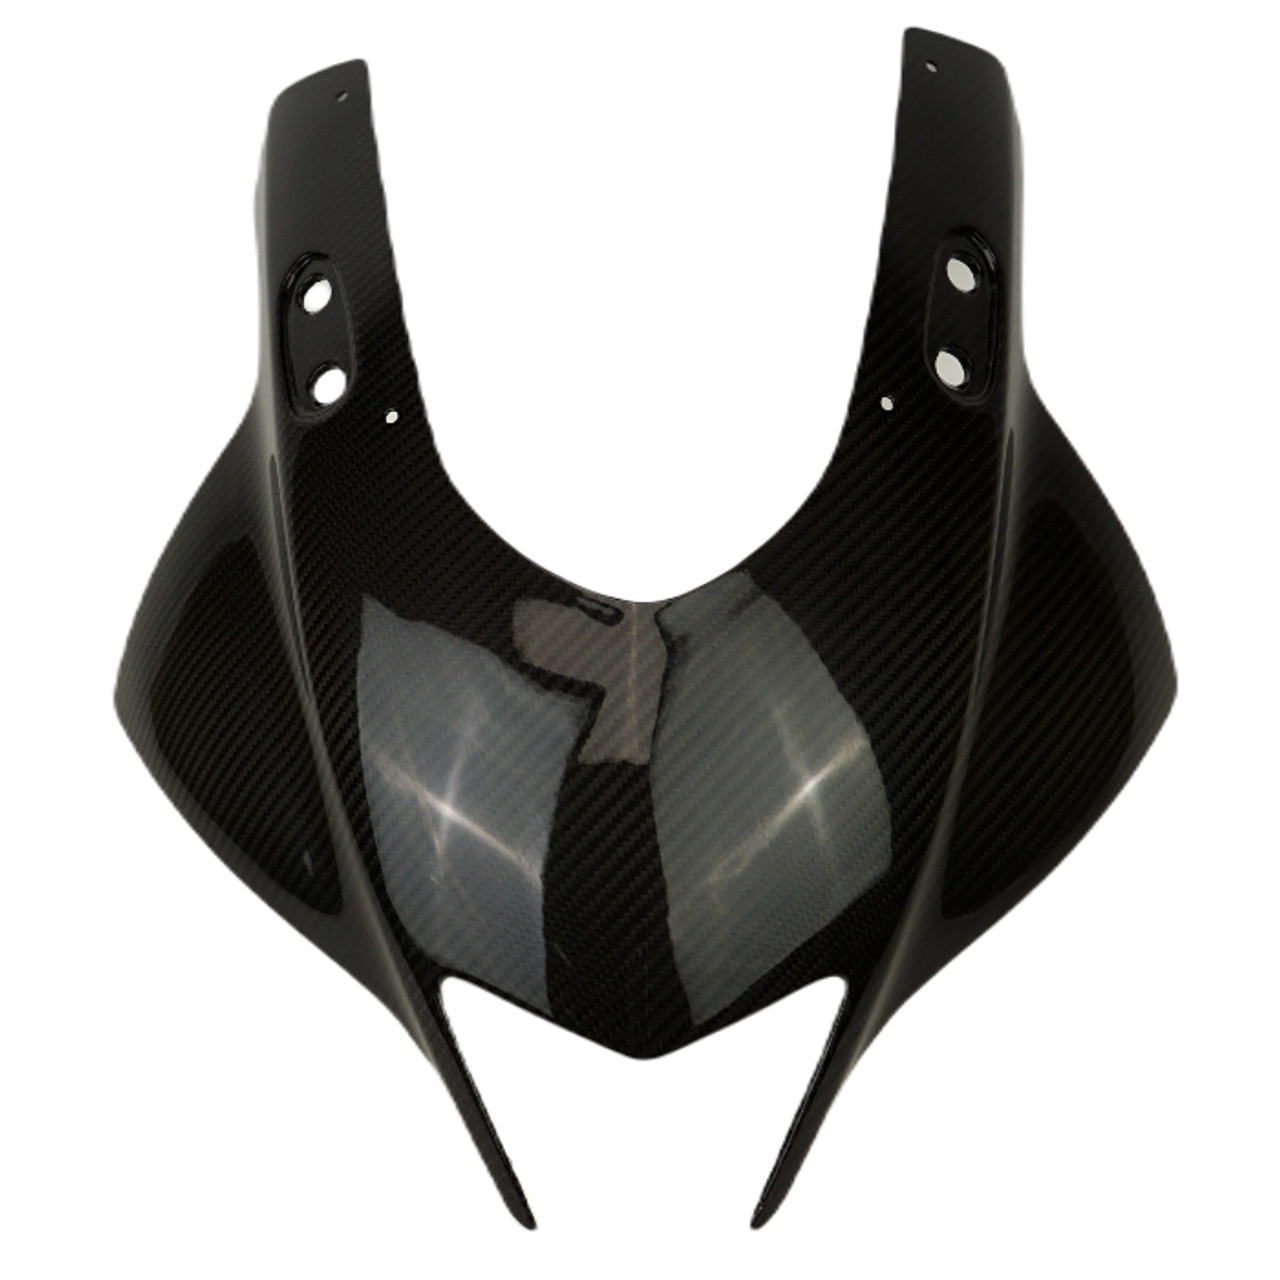 Front Fairing in Glossy Twill Weave Carbon Fiber for Yamaha R3, R25 2019+

